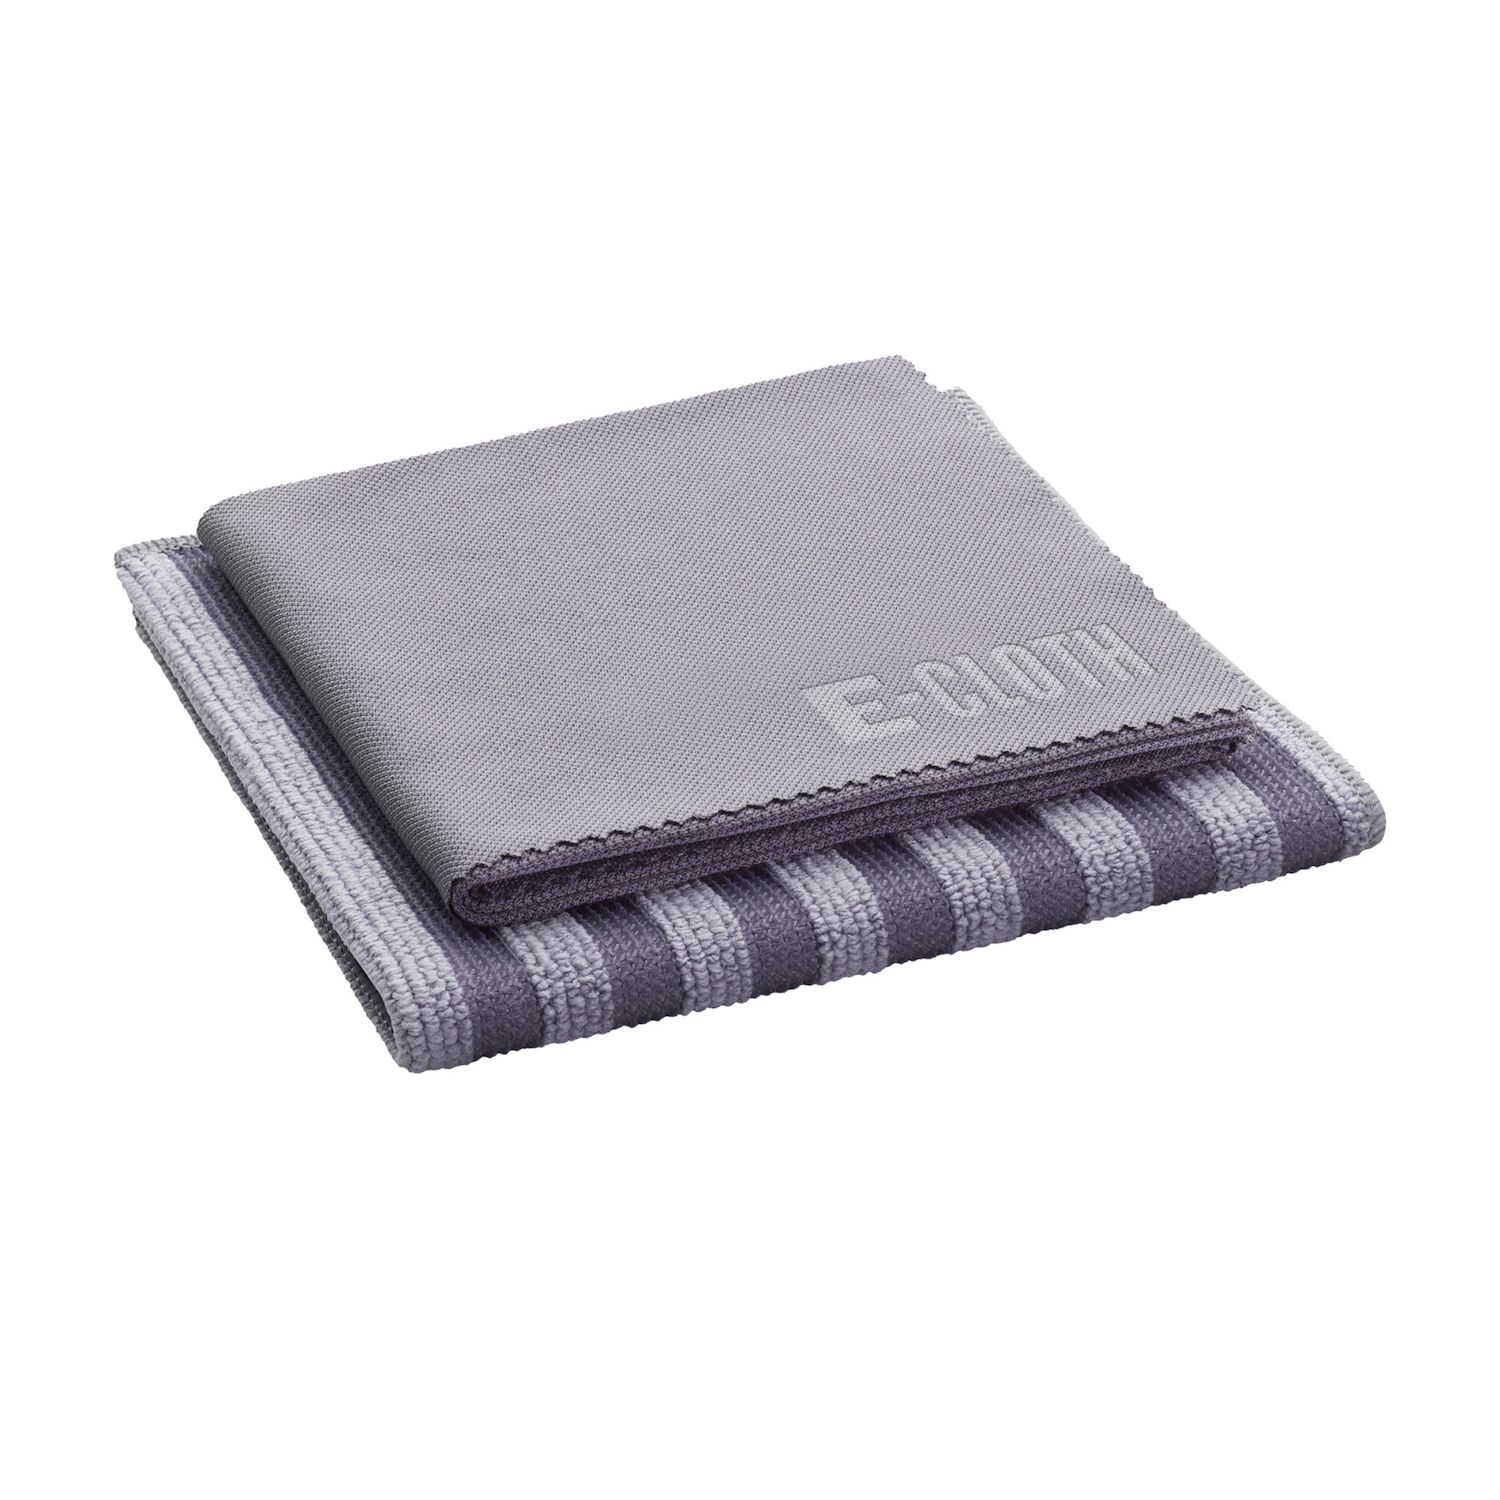 Image for E-Cloth Stainless Steel Cleaning Pack - Microfiber 2 Cloth Set at Kohl's.